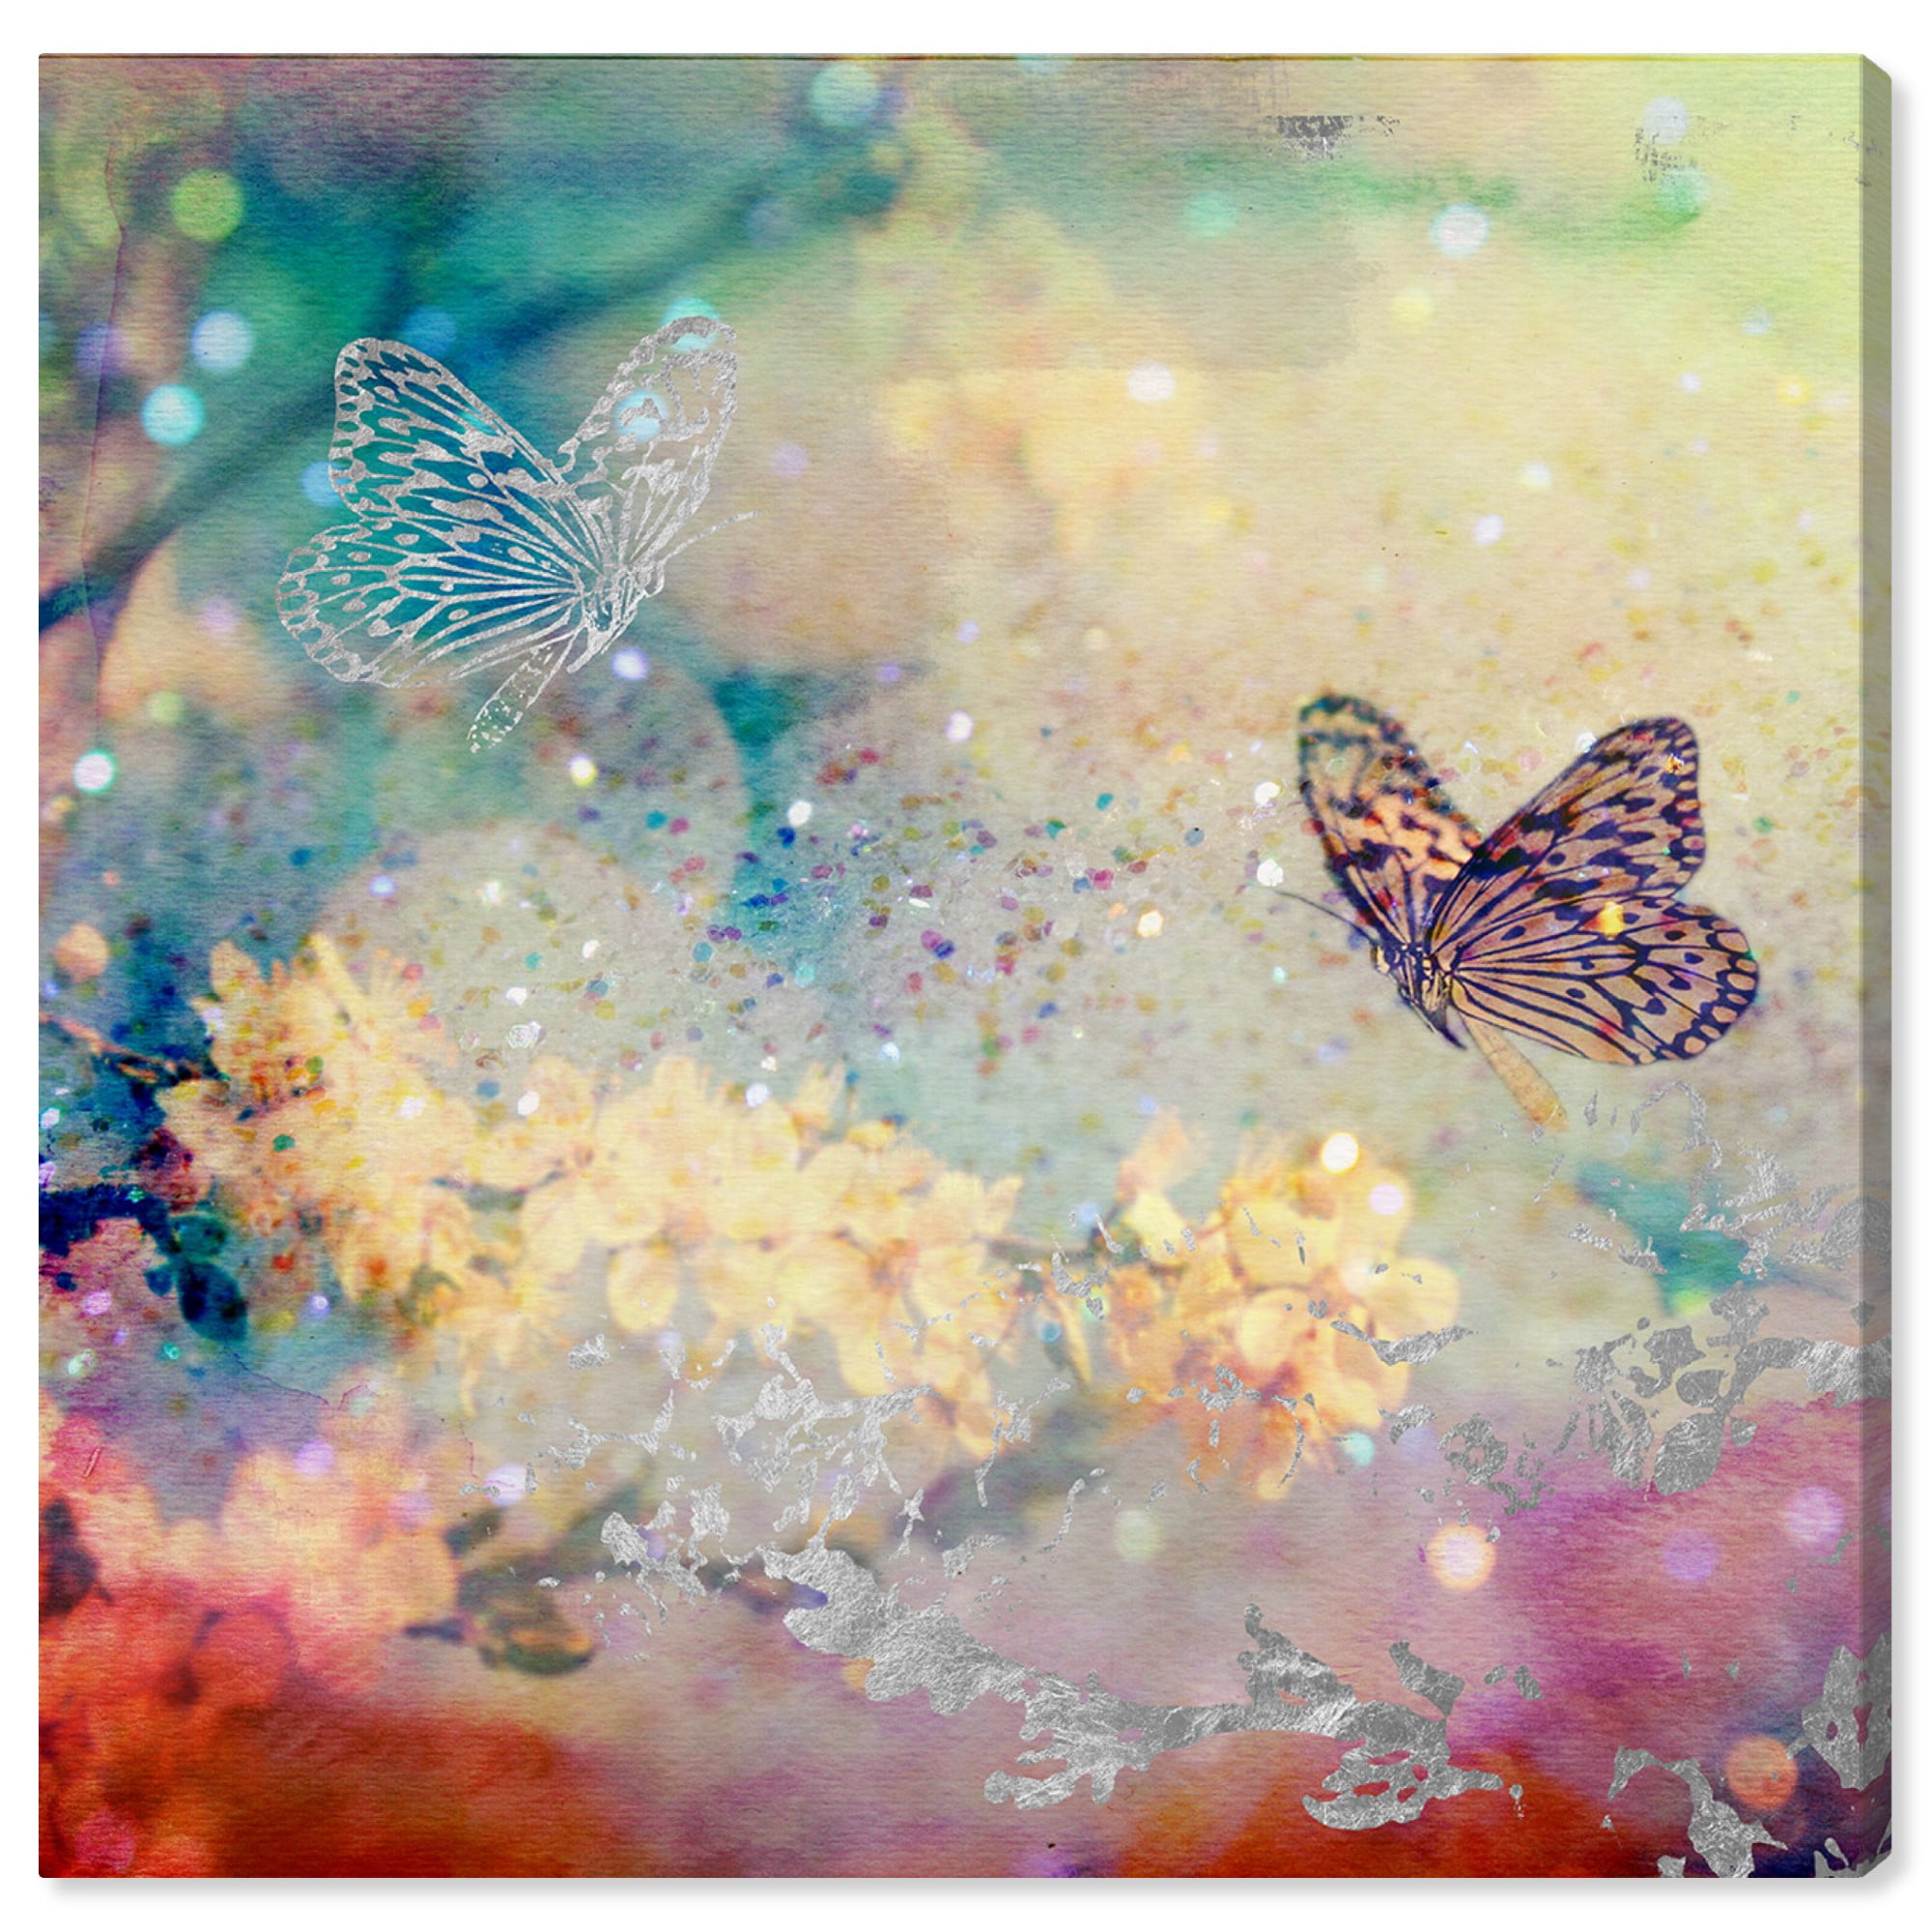 Butterflies Spring Celebration II Floral Tree Wall Picture 8x10 Art Print 